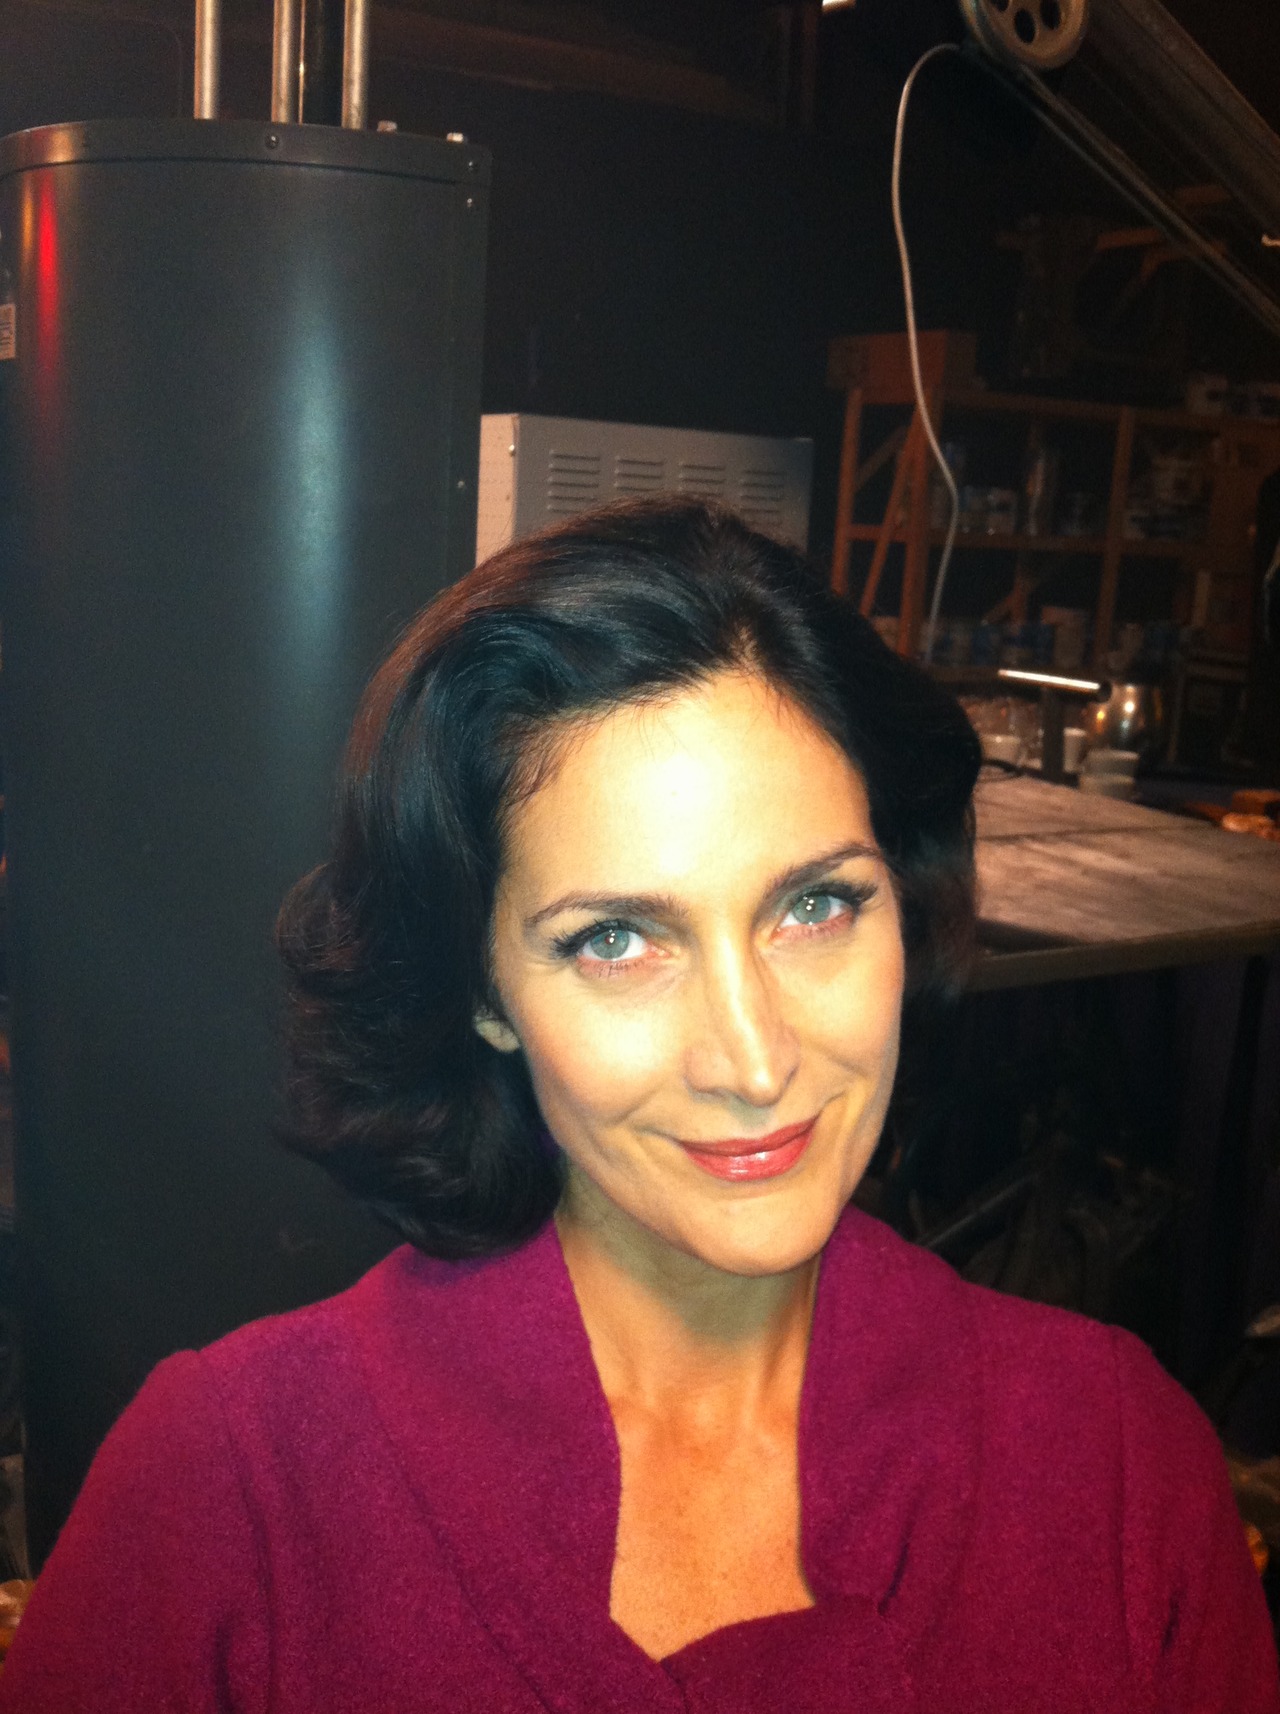 Vegas TV Series/ Carrie Ann Moss/ Cut and Style for 1950's